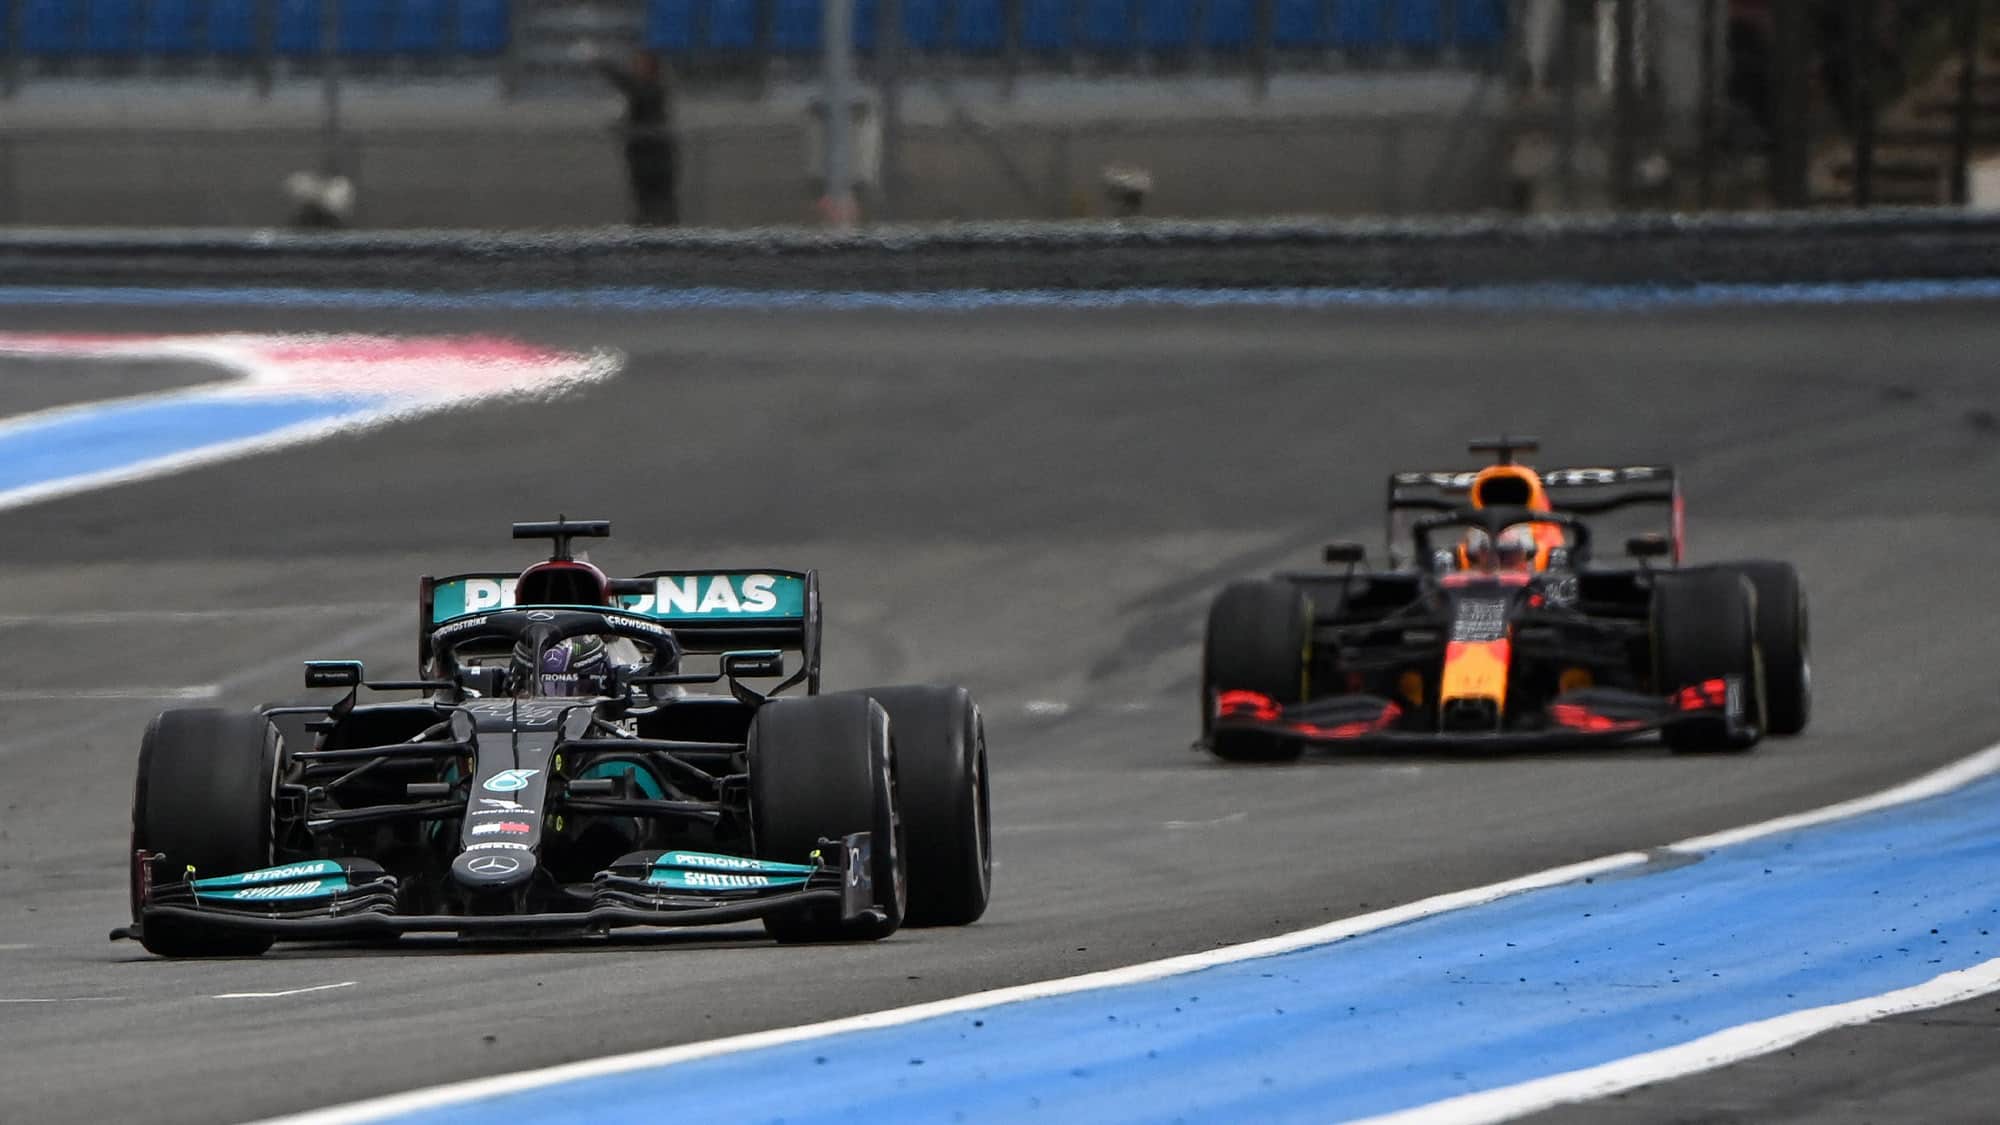 Lewis Hamilton leads Max Verstappen in the 2021 French Grand Prix